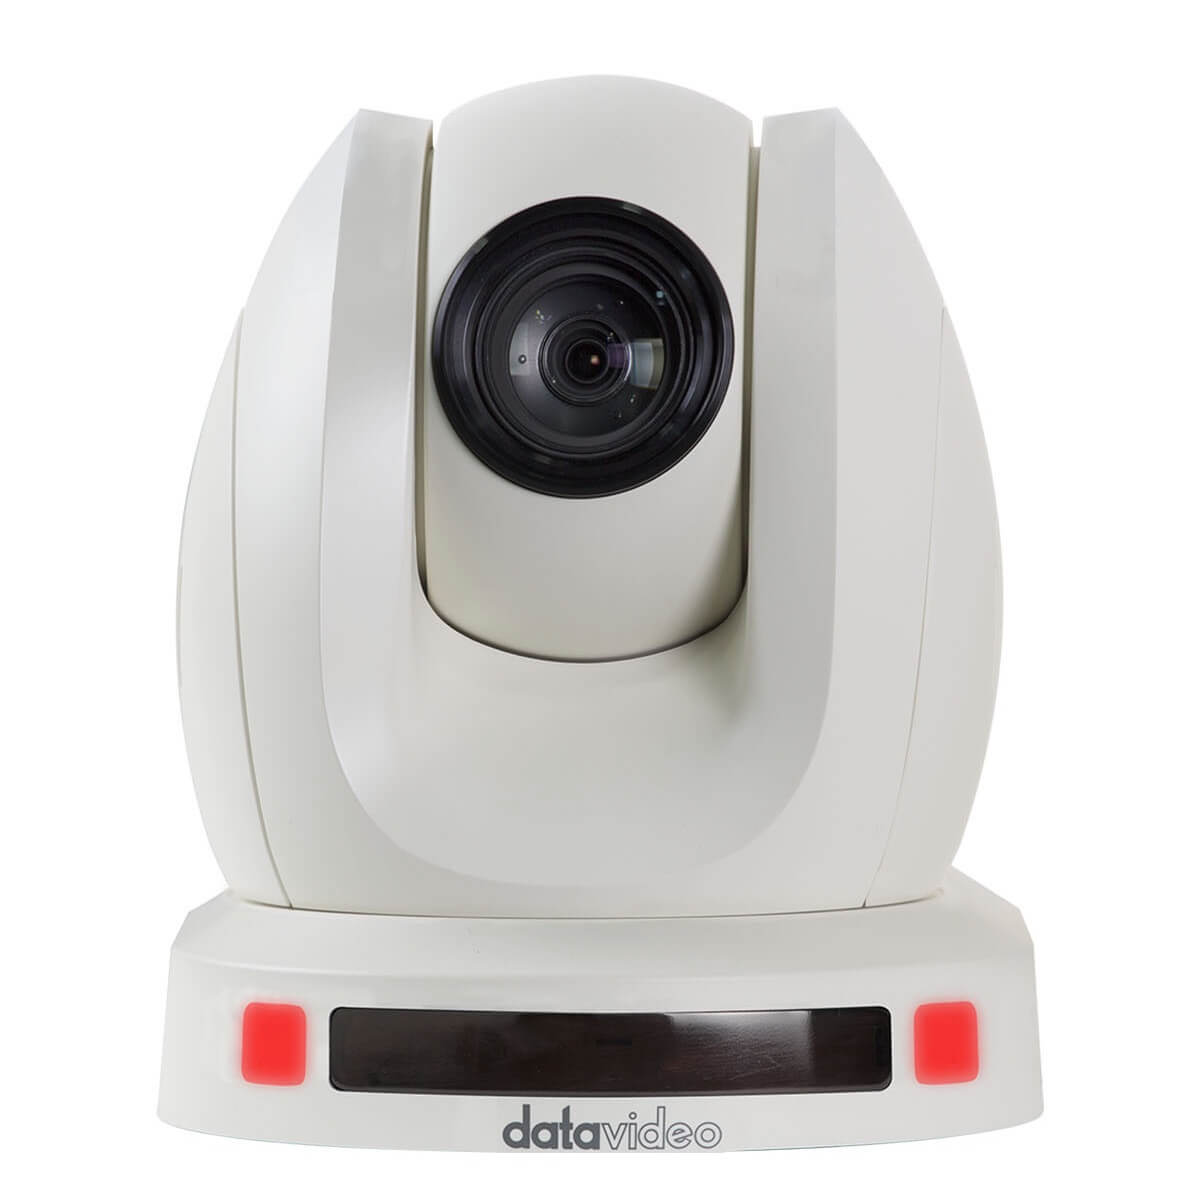 DataVideo PTC-140 - HD/SD-SDI and HDMI PTZ Camera with 20x Optical Zoom, front view white